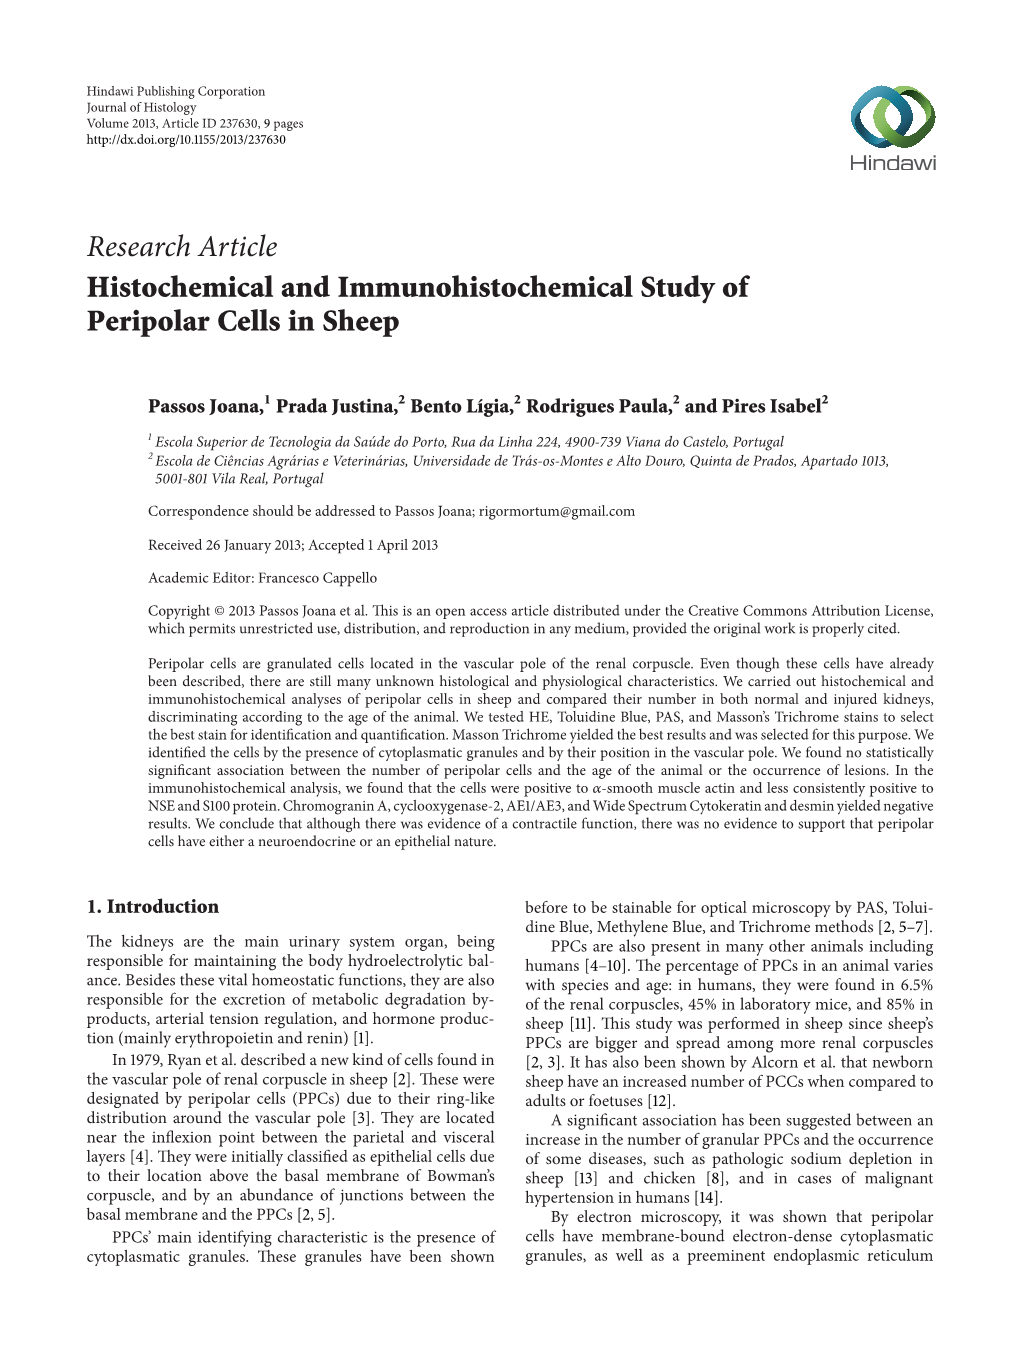 Histochemical and Immunohistochemical Study of Peripolar Cells in Sheep